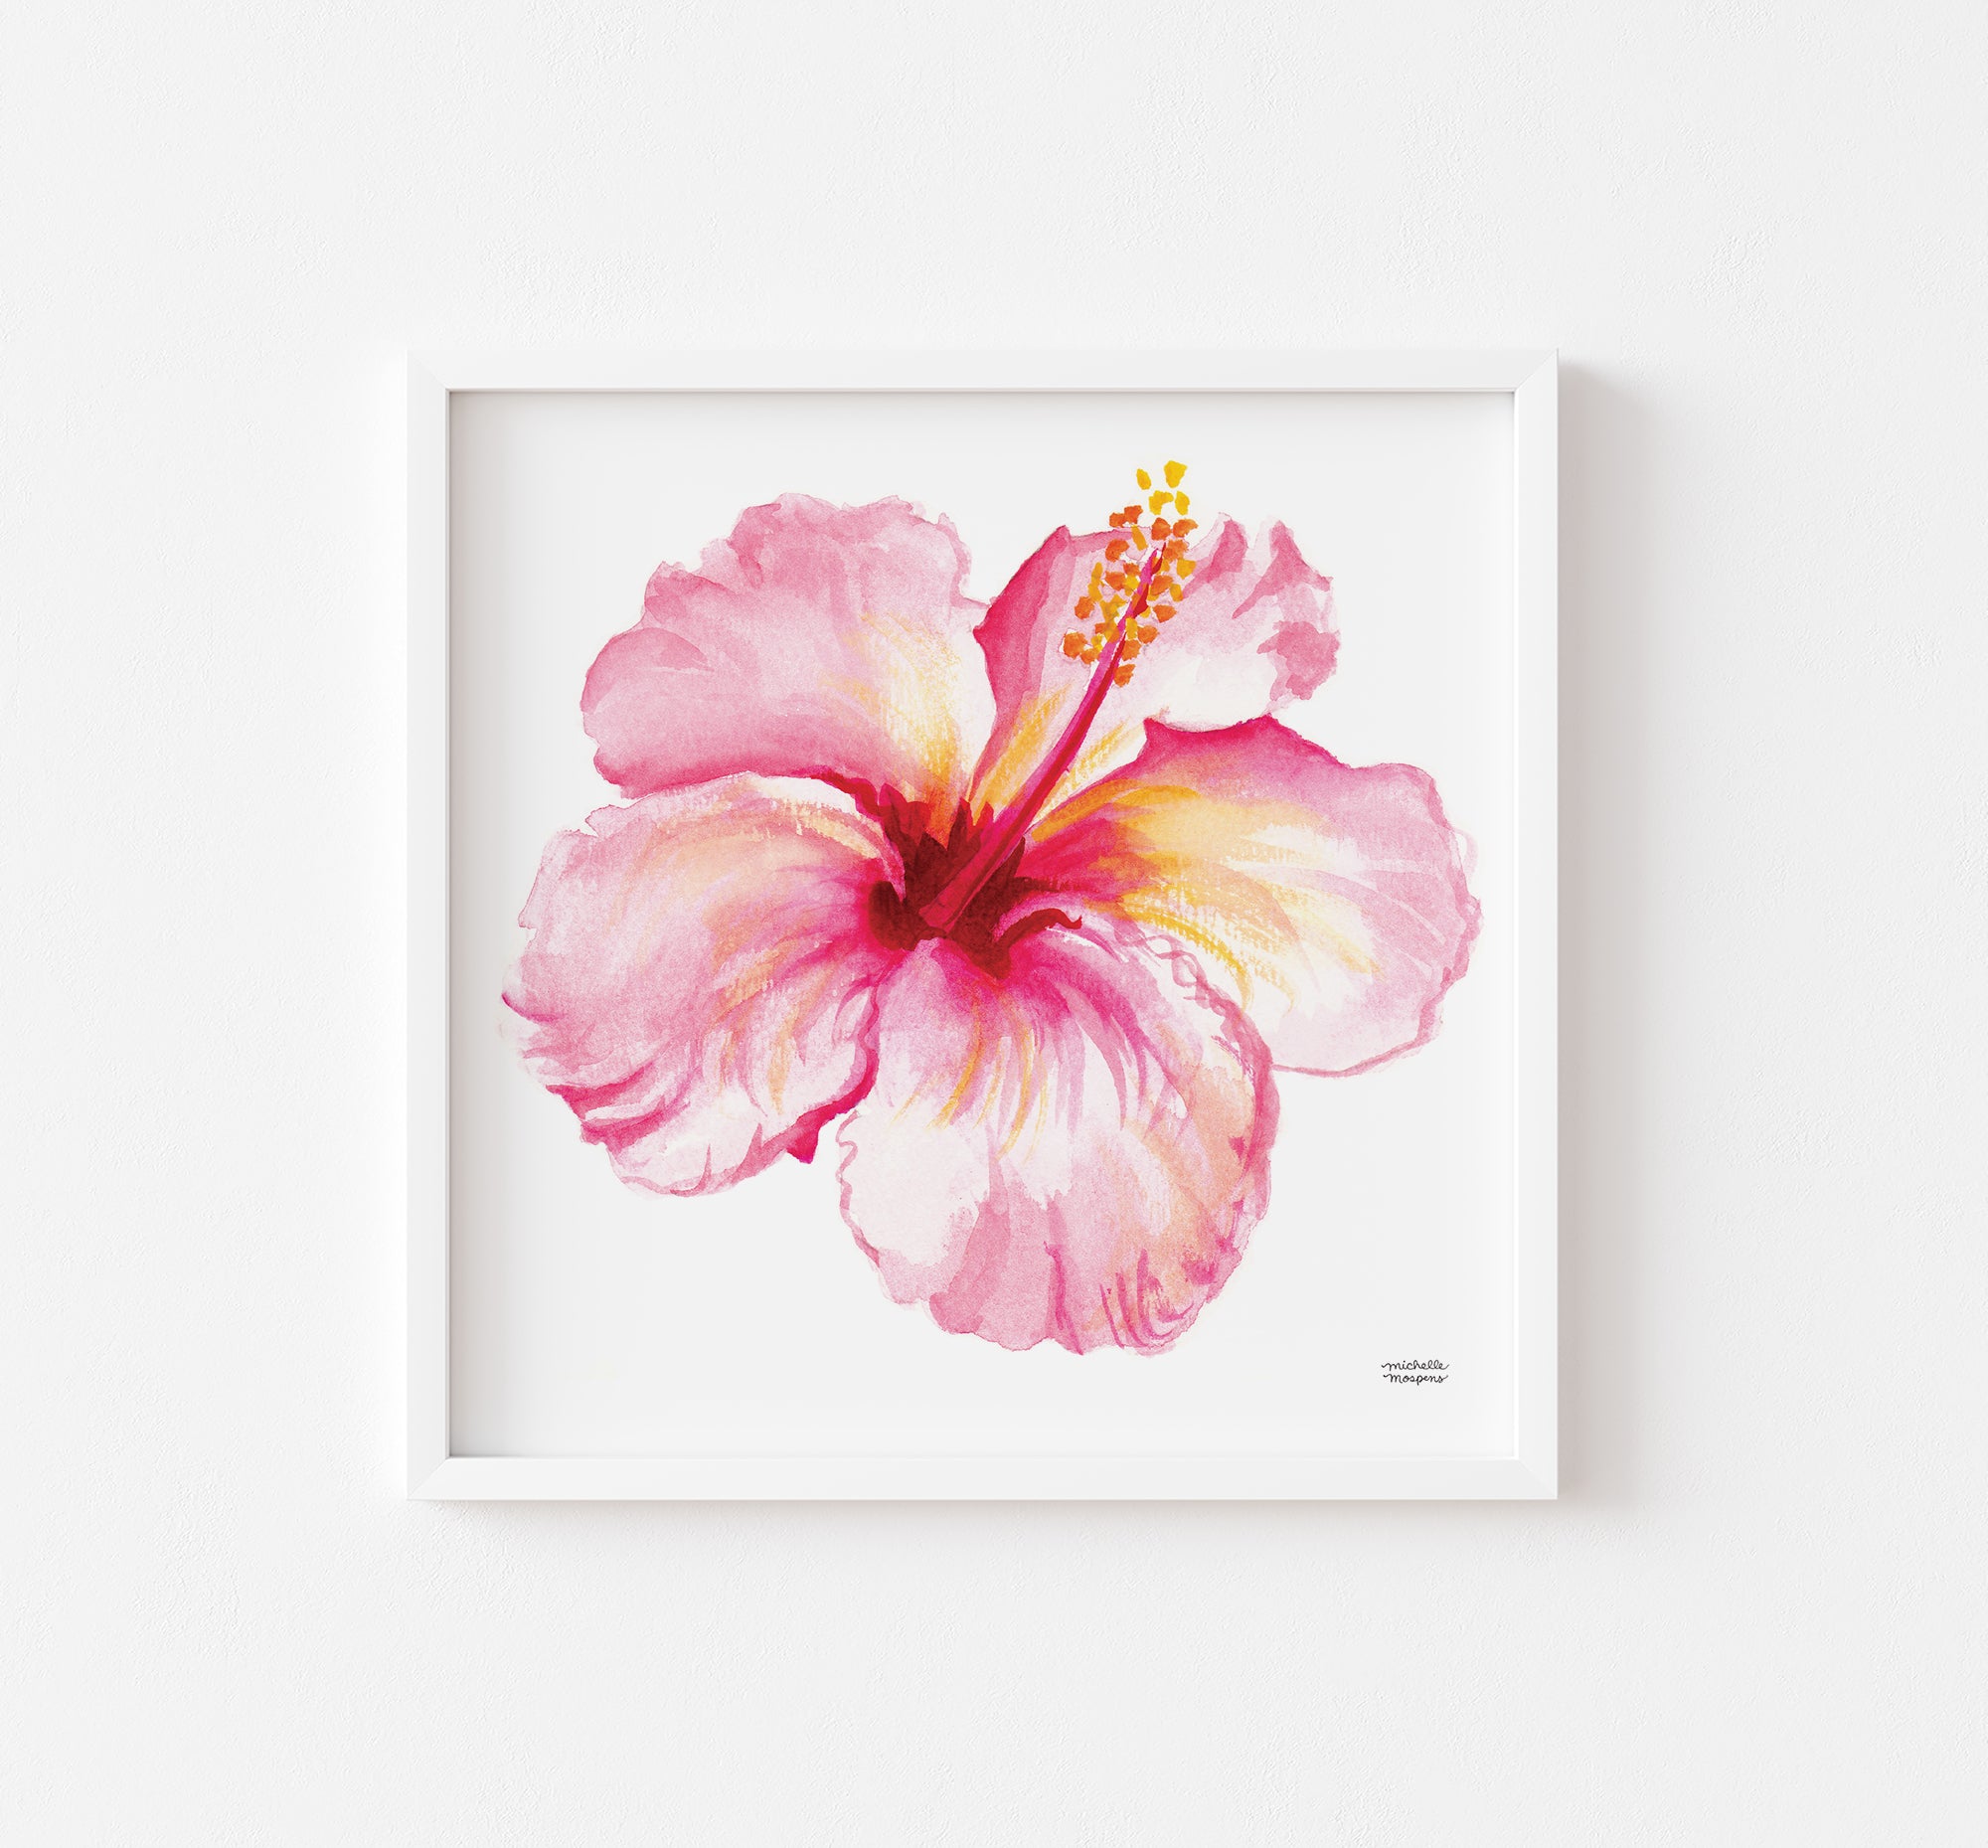 Bright Pink Hibiscus Watercolor Print by artist Michelle Mospens